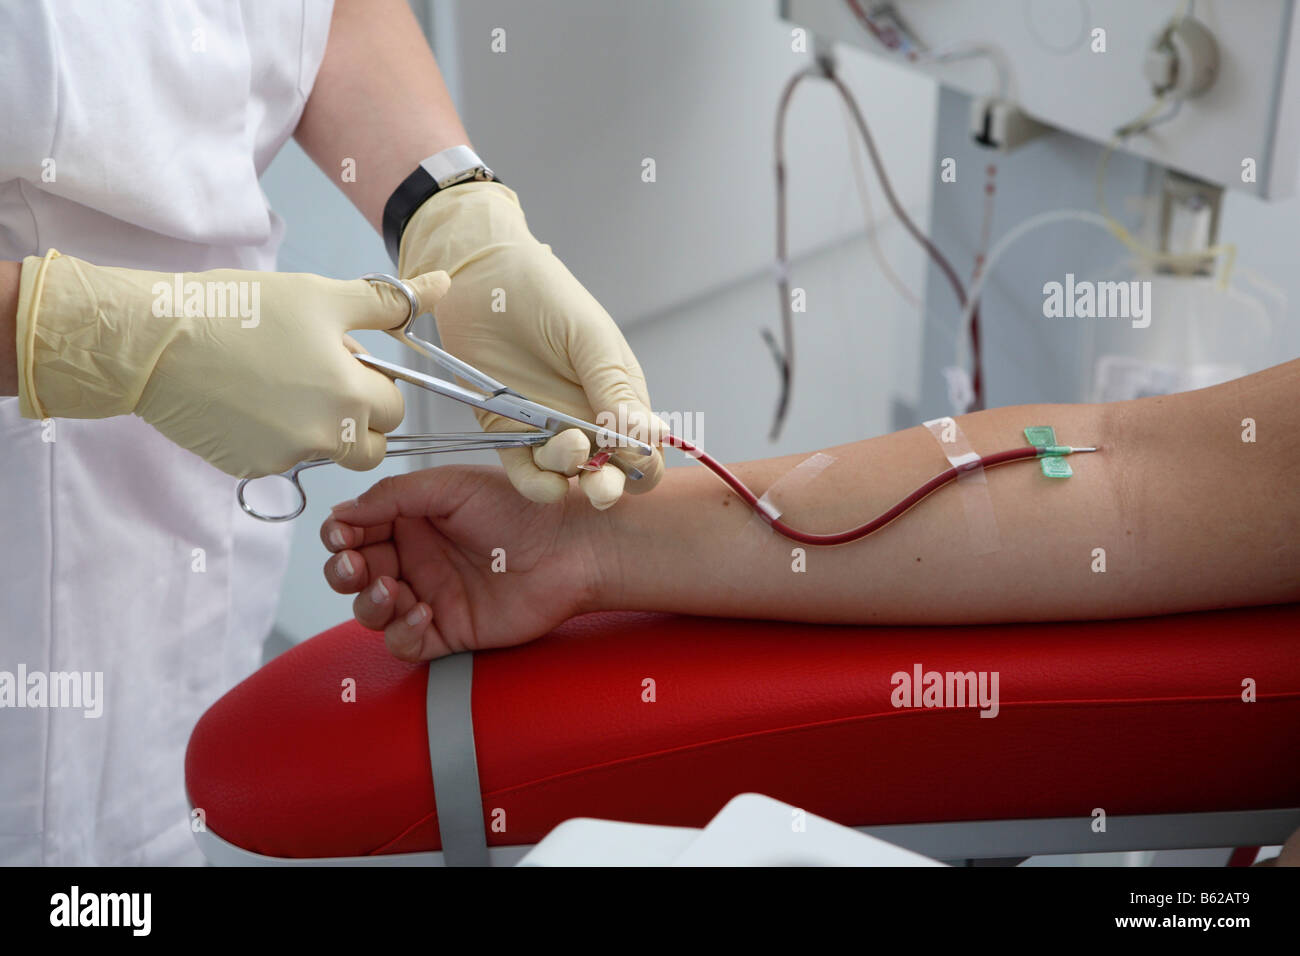 Hand during the taking of a blood sample Stock Photo